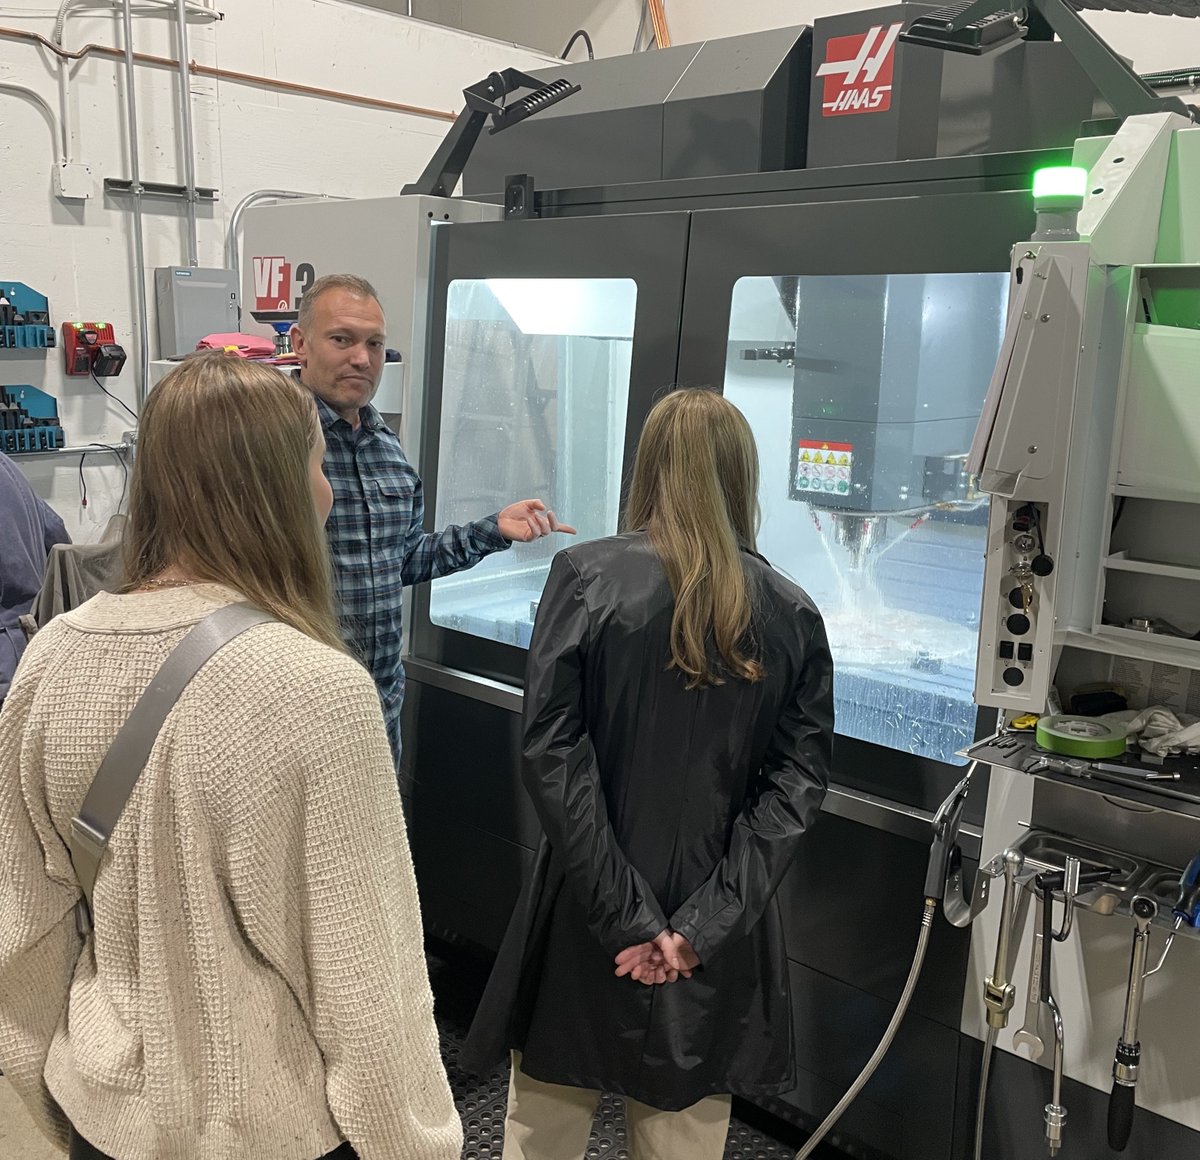 Yesterday we were fortunate to host Sara Moore and Ally Wilson from the @UAlberta Innovation Fund for a facility tour. The Innovation Fund will help early-stage tech companies foster partnerships with investors around the globe. Read more:

alberta.ca/release.cfm?xI….

#AlbertaTech